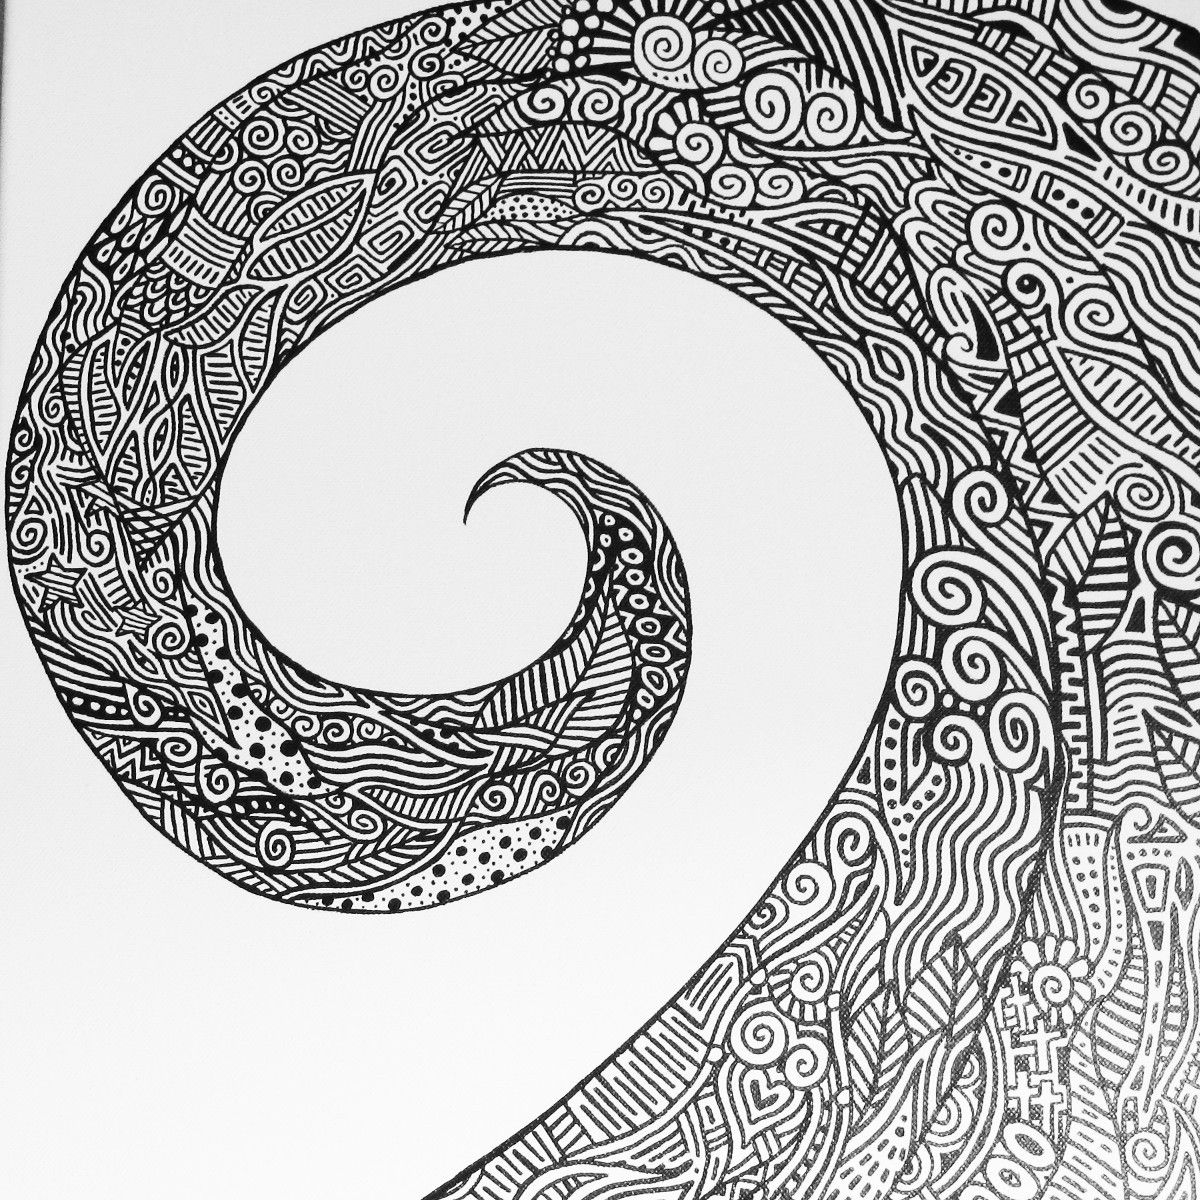 Coloring!! | Zentangle, Coloring Pages For Adults and ...